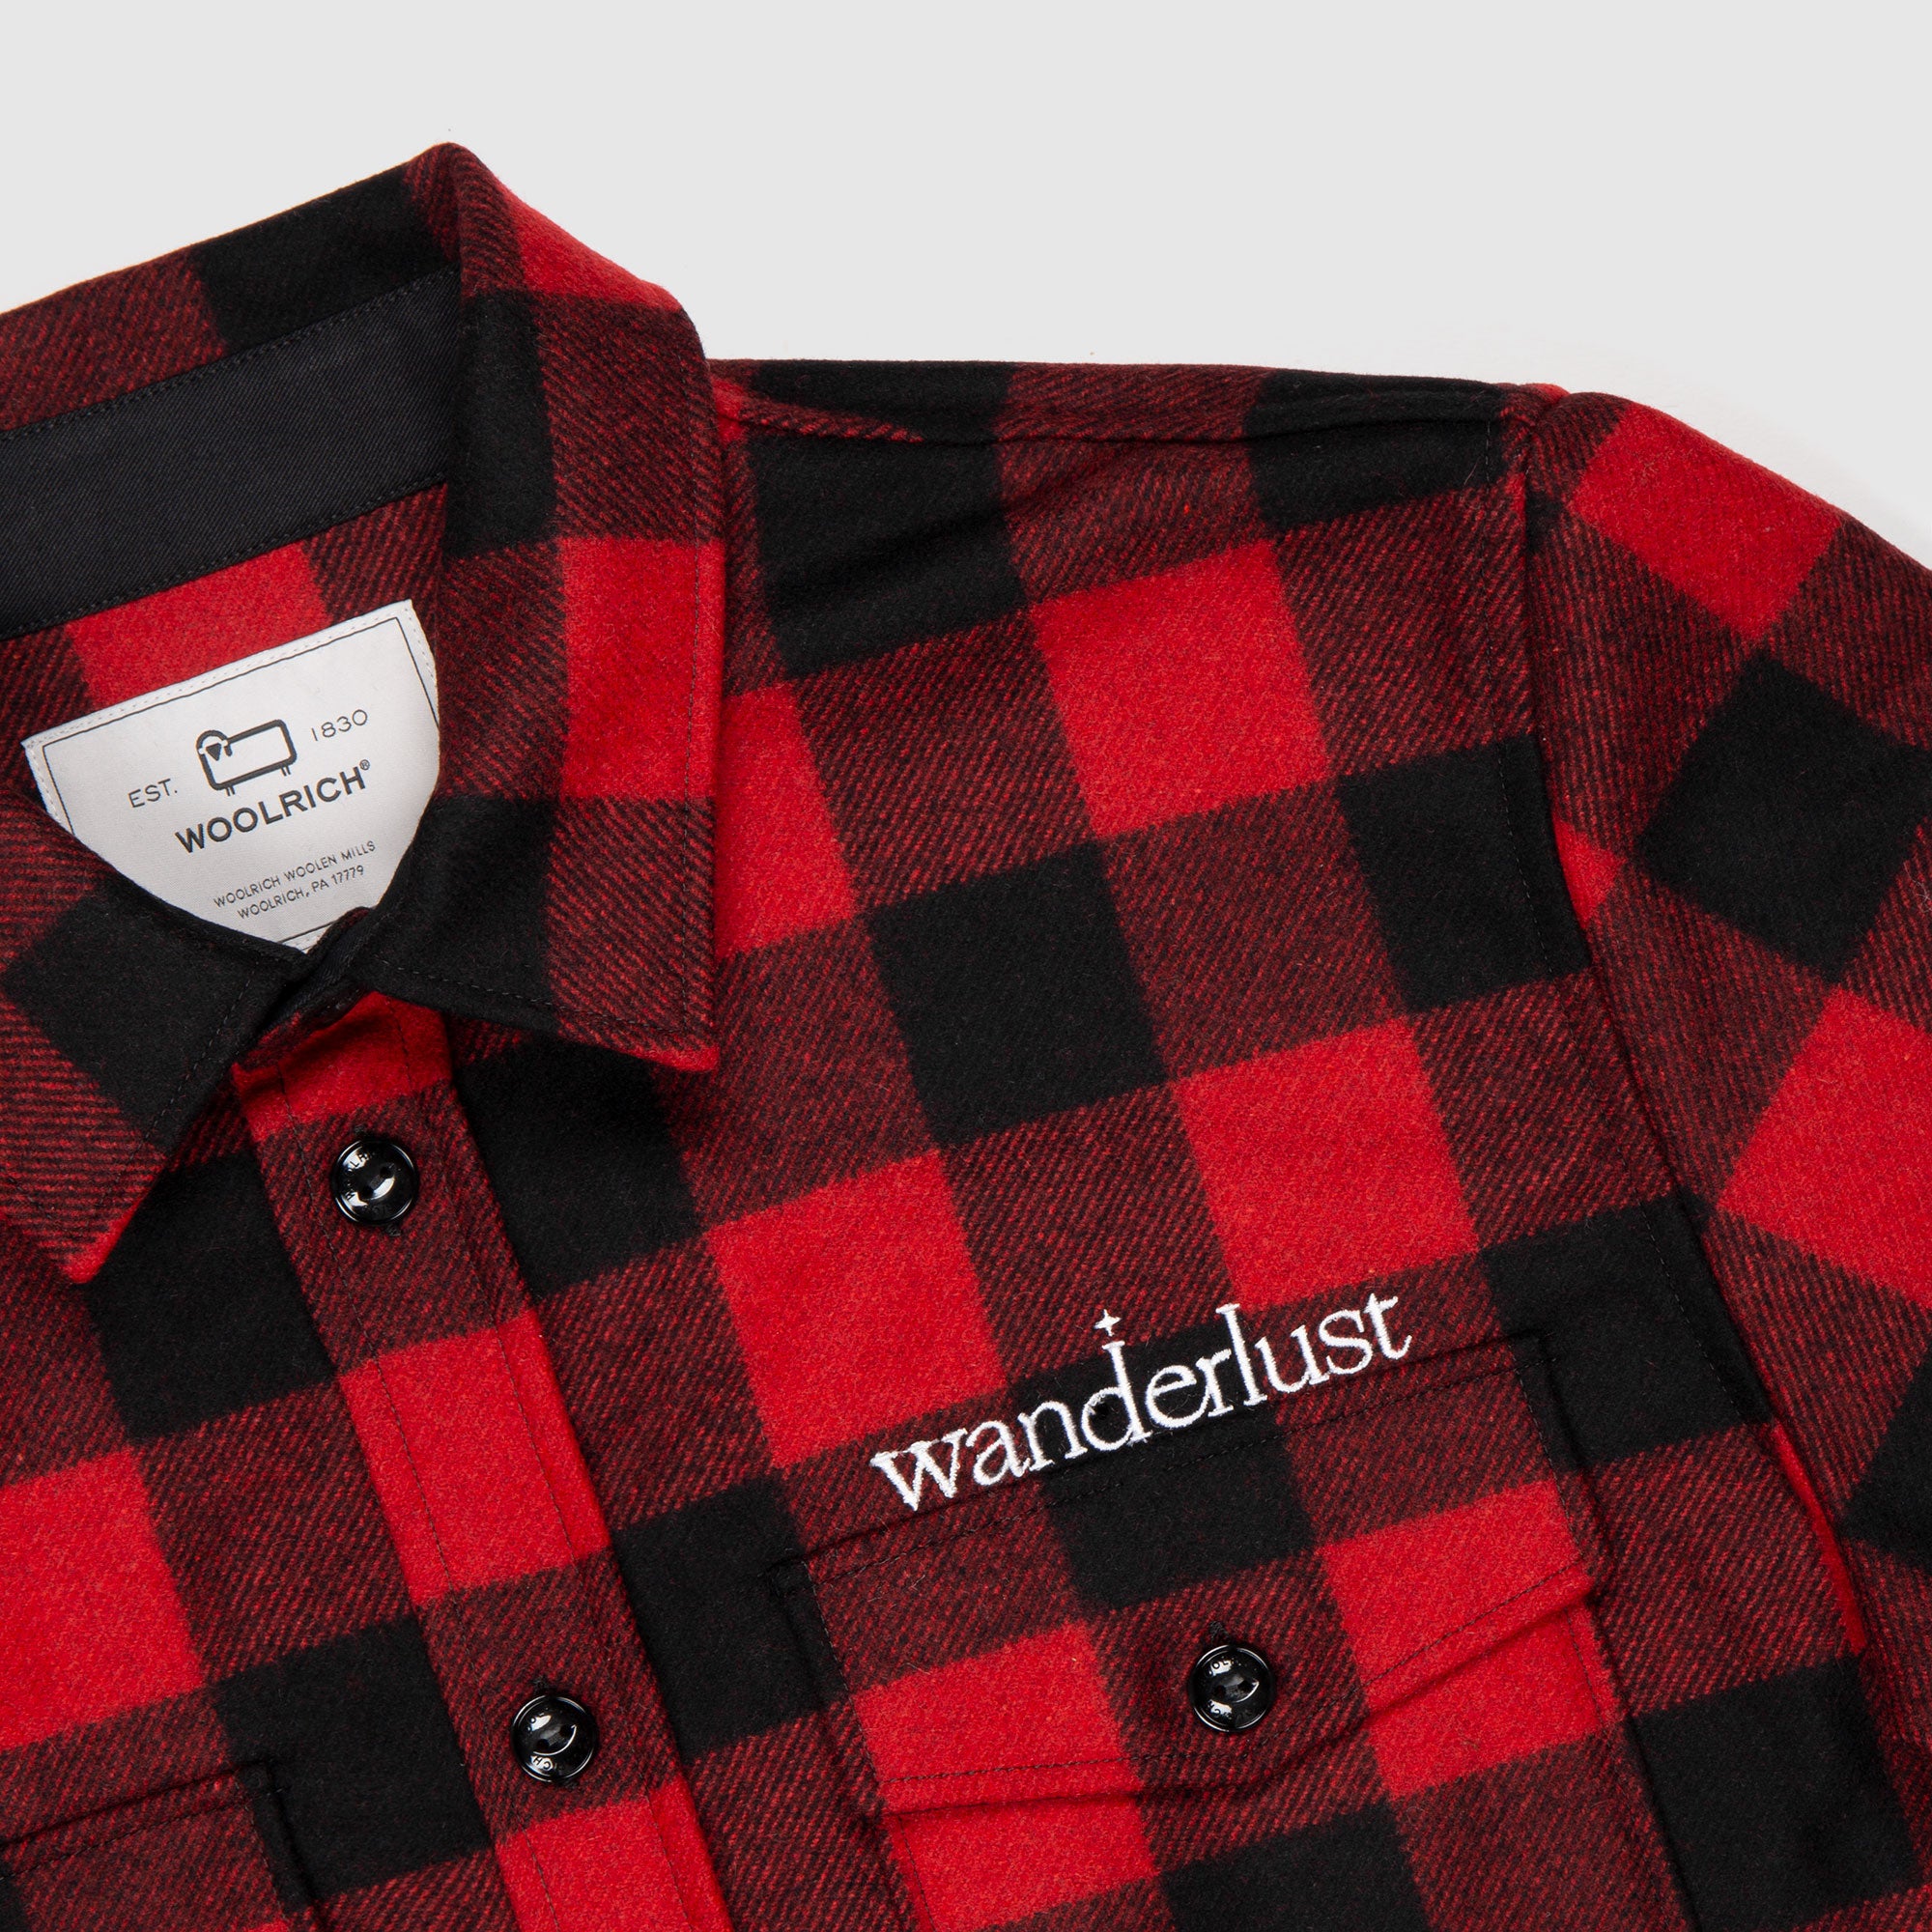 Camicia Check Woolrich™